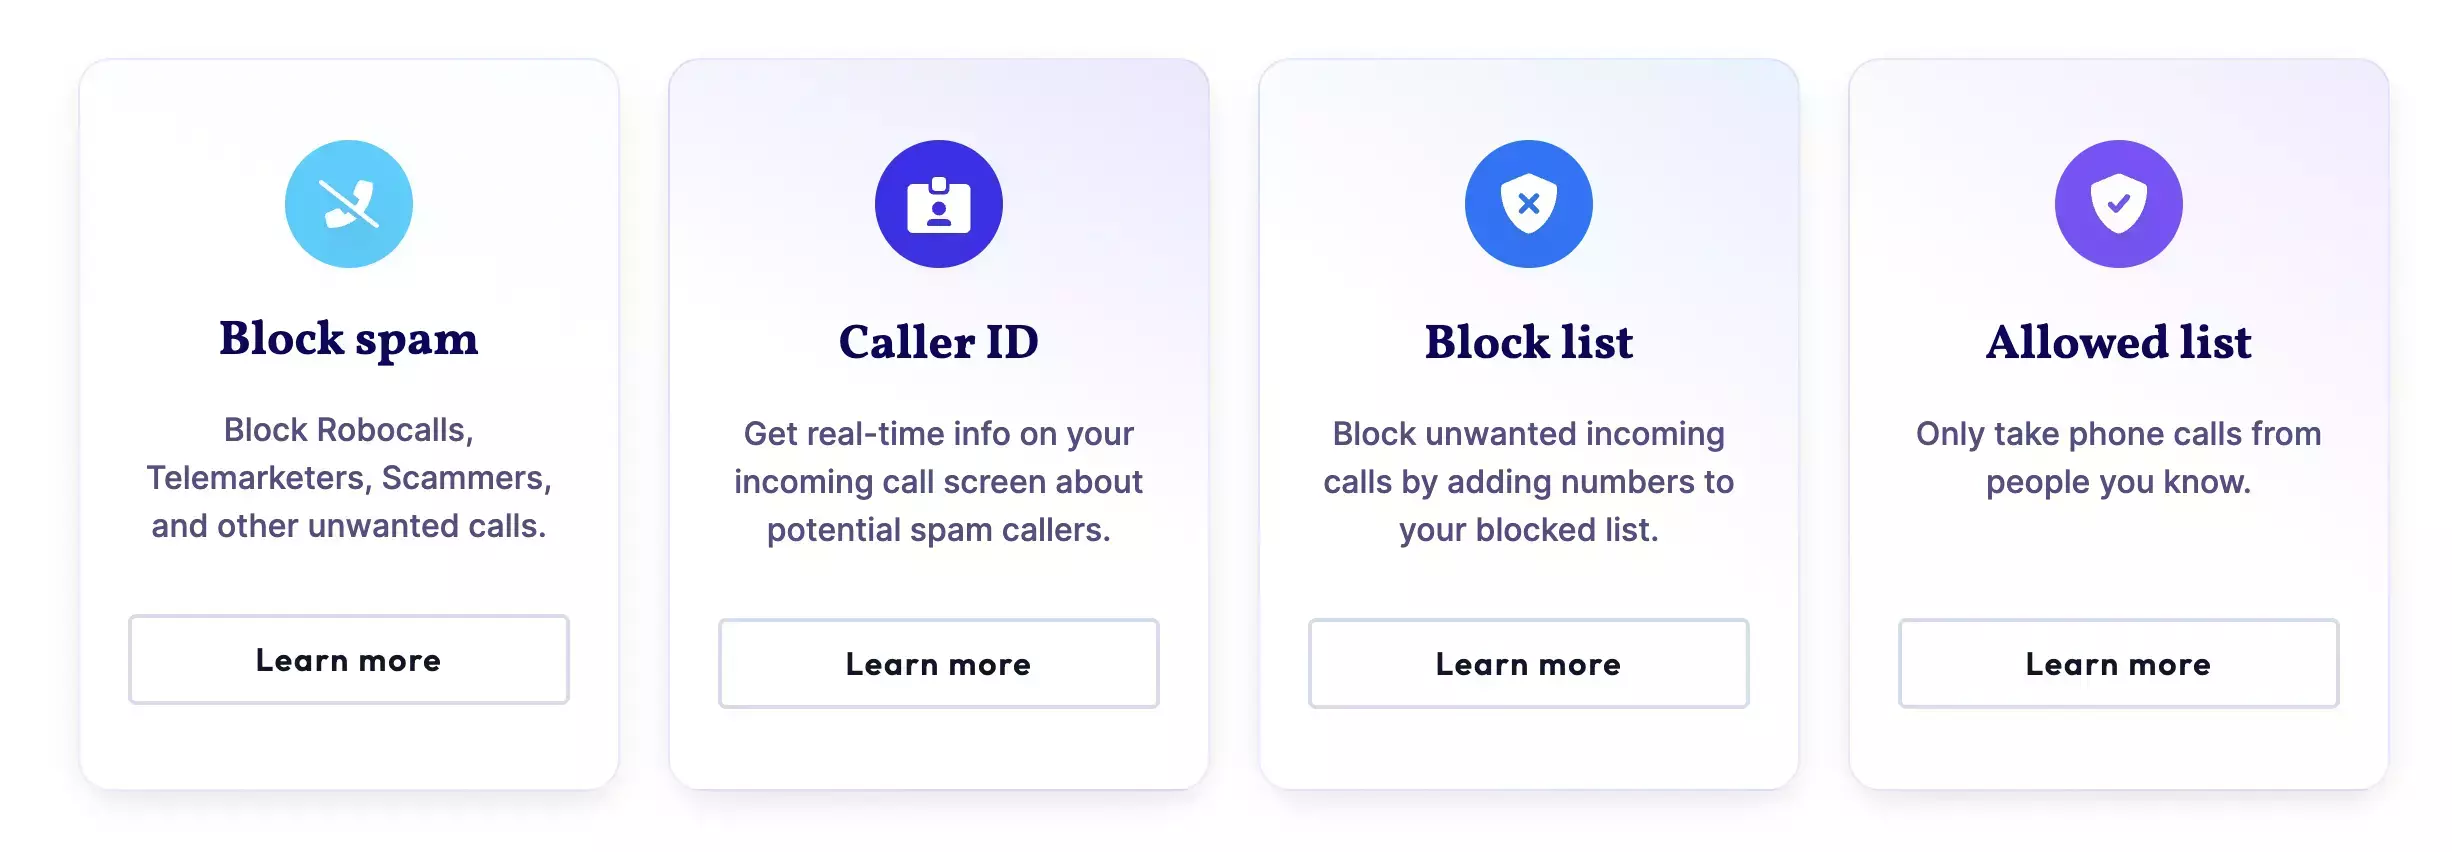 An image of Community Phone spam call blocker features